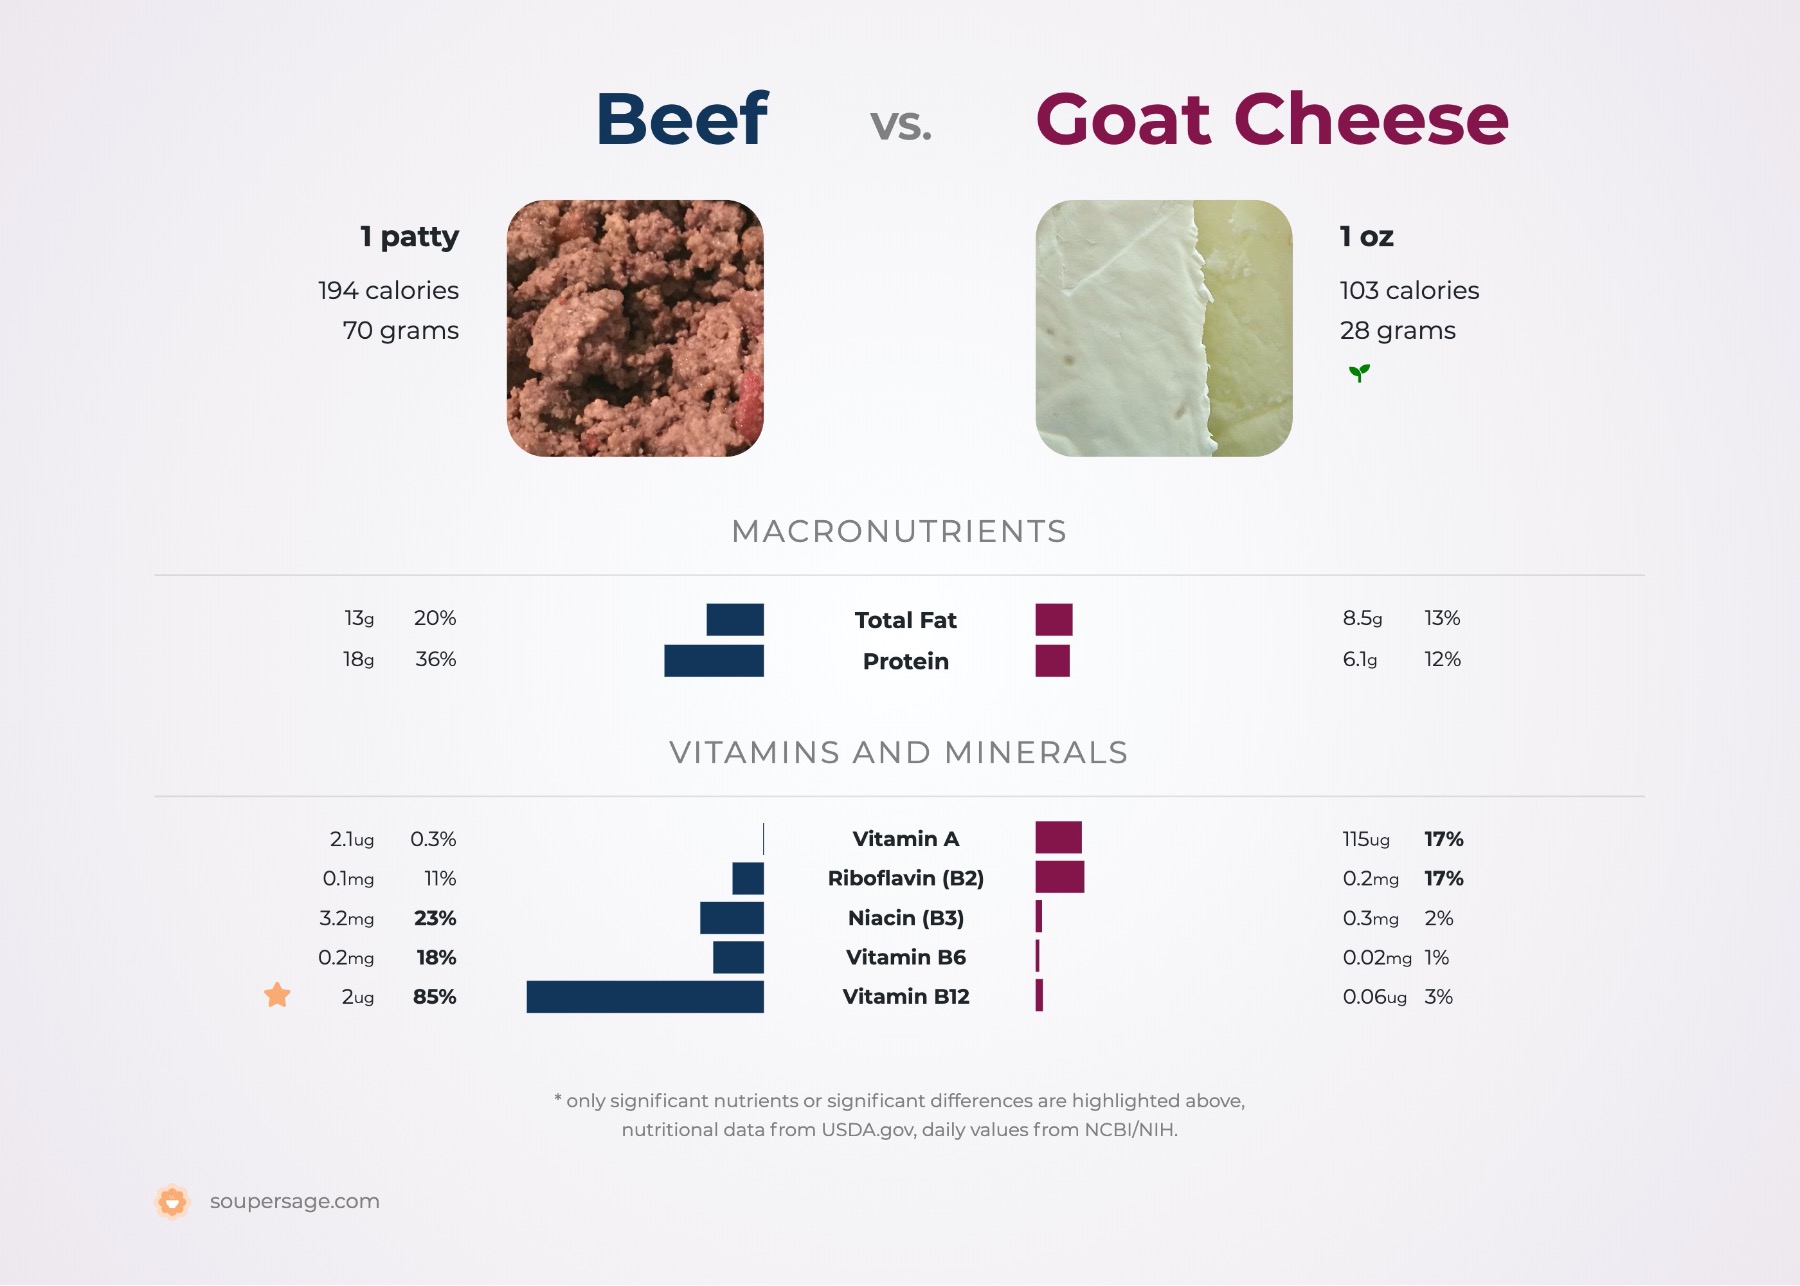 nutrition comparison of beef vs. goat cheese